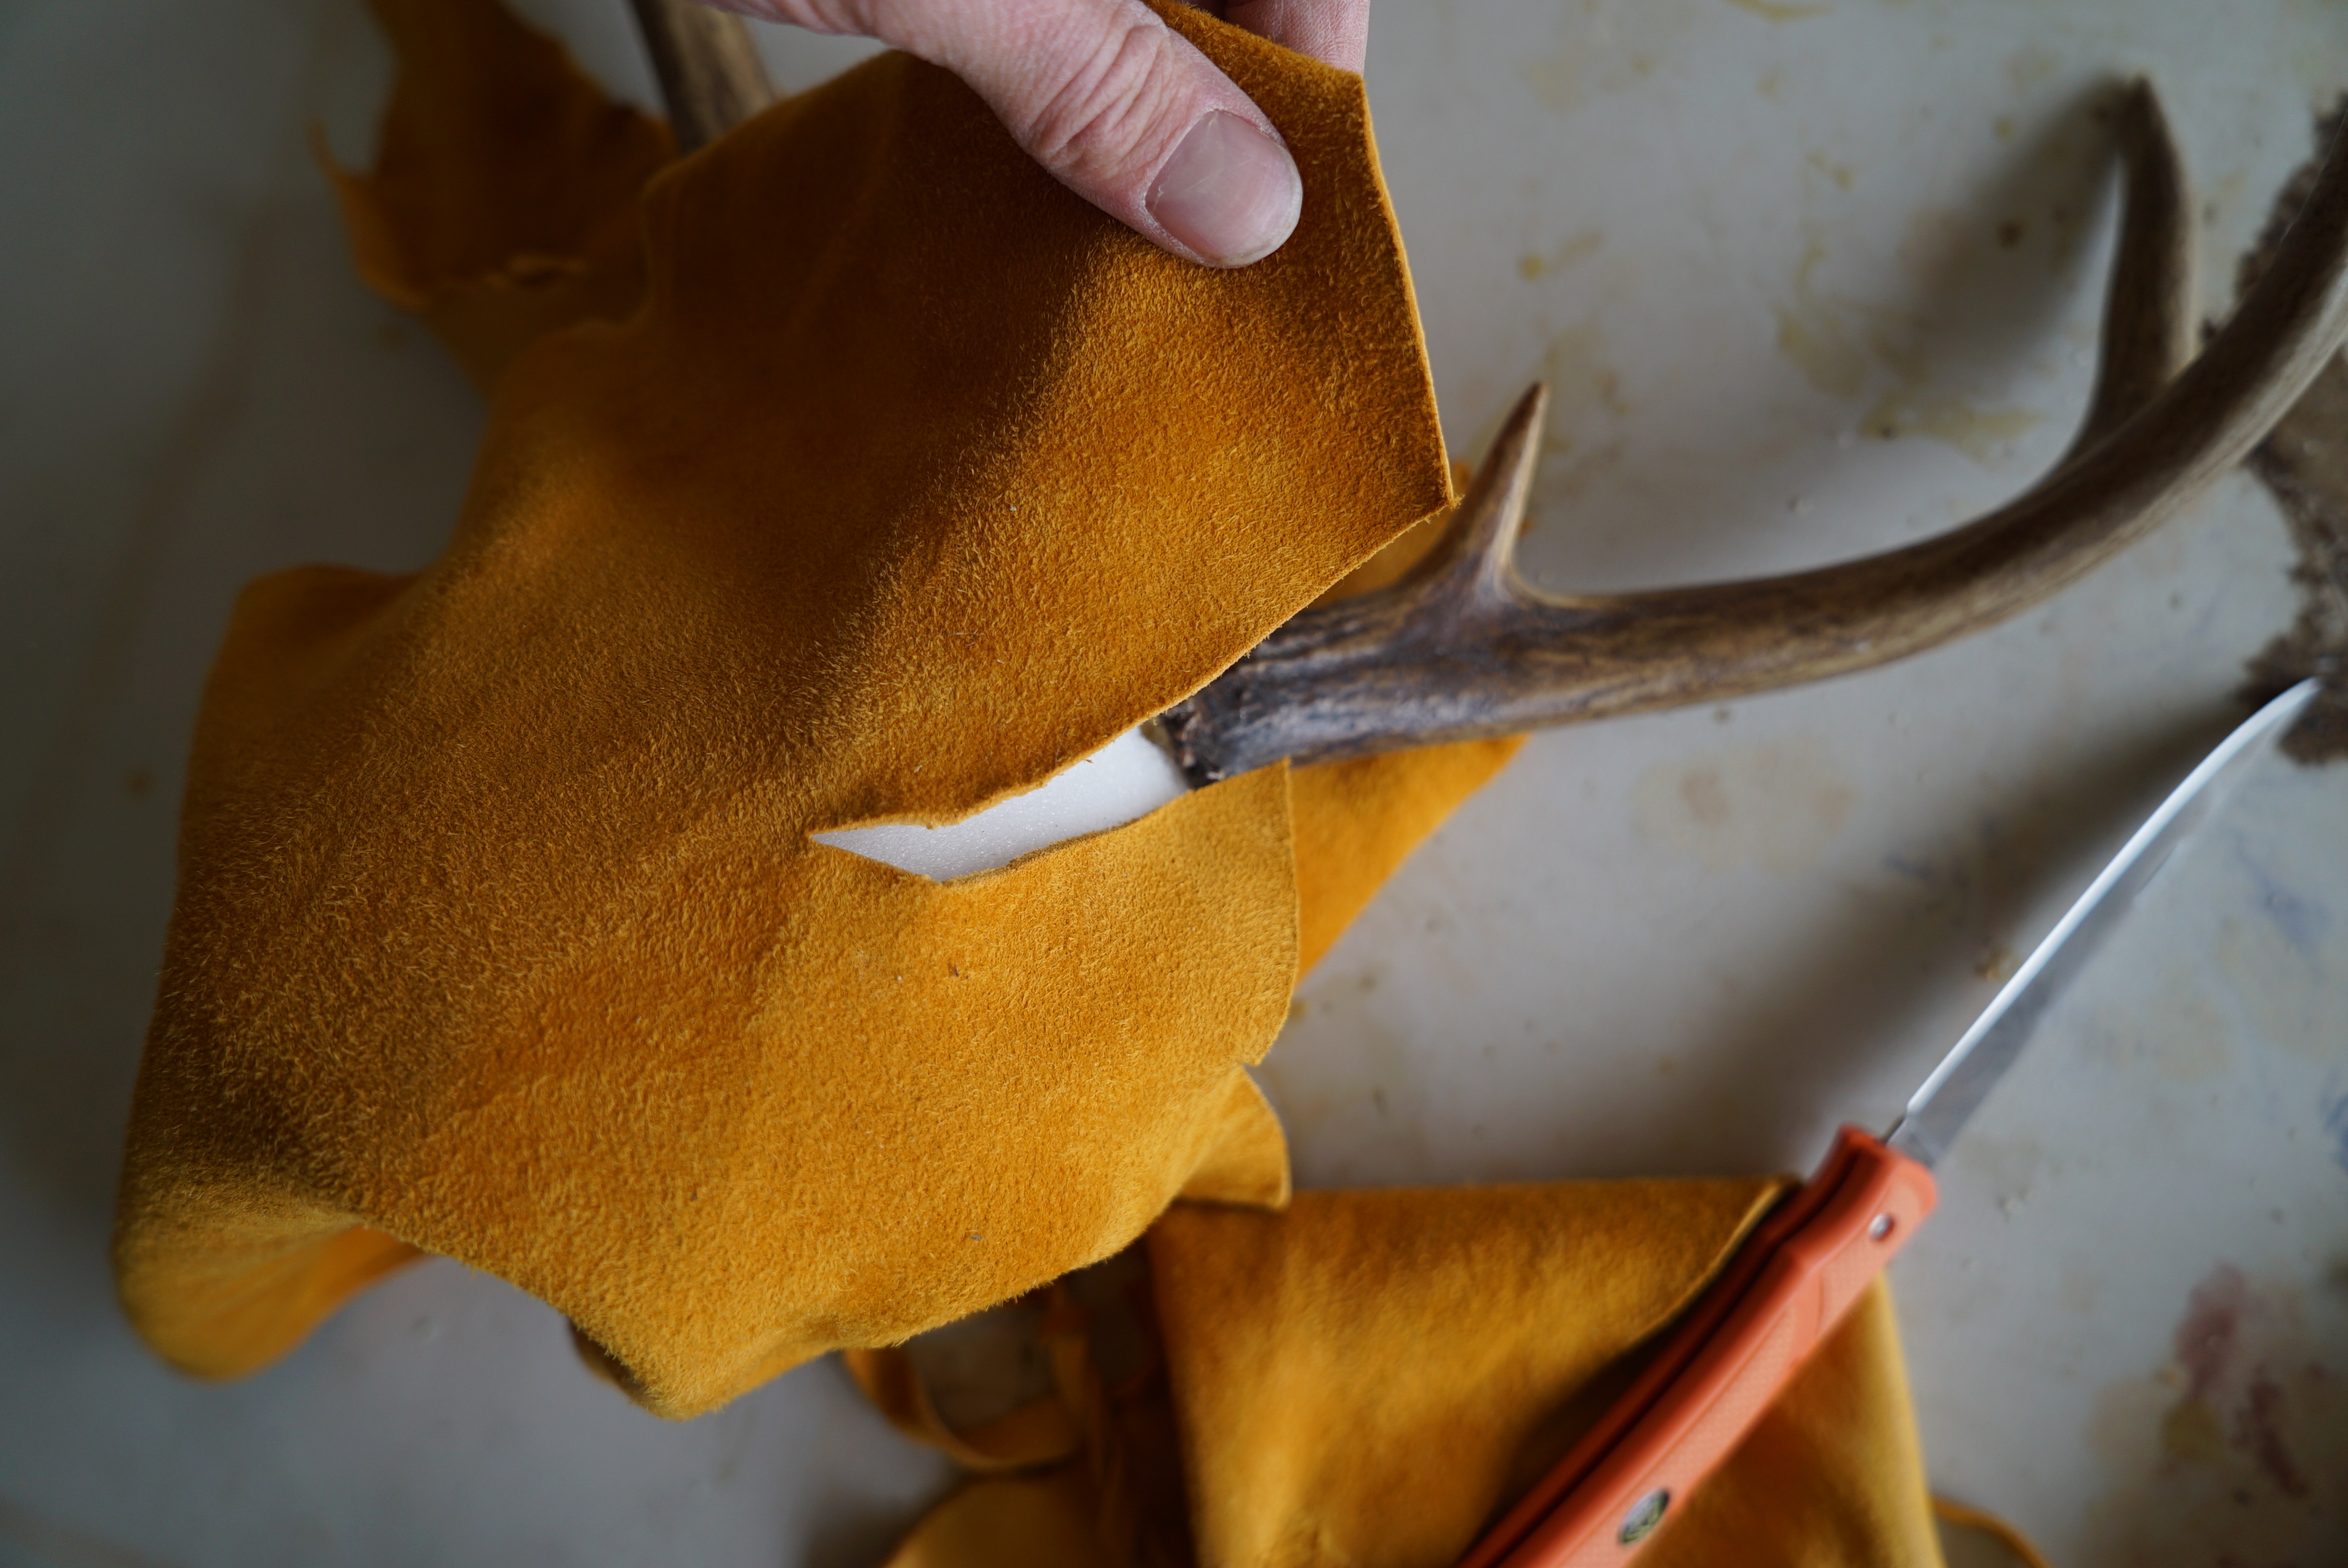 cut slits in the leather so it can fit around the horns.